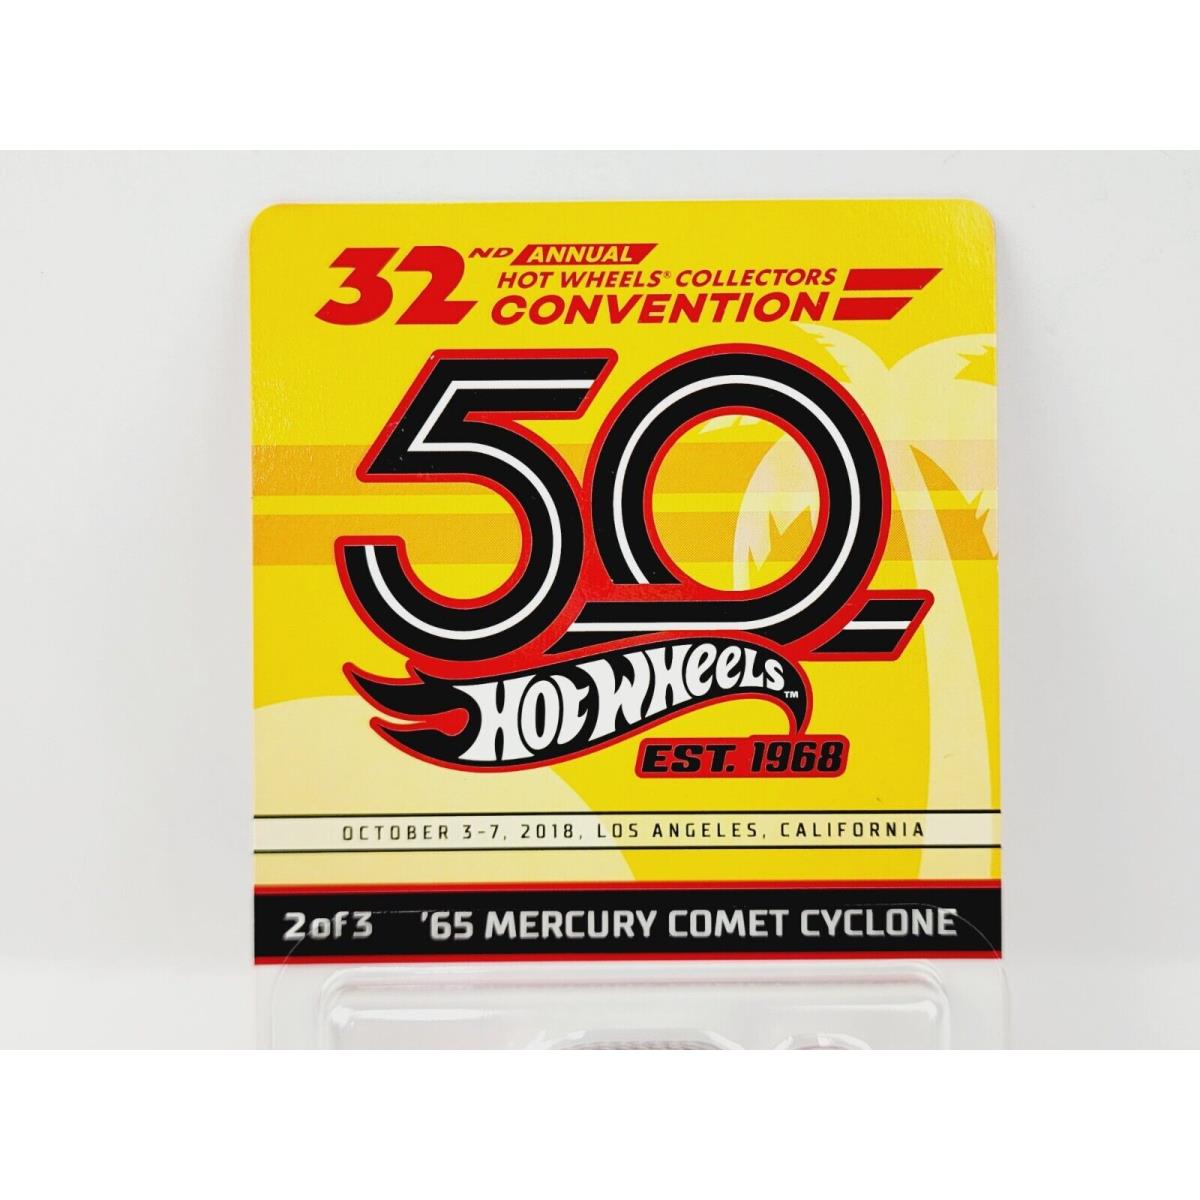 Hot Wheels 32ND Convention `65 Mercury Comet Cyclone 4205 Very Nice JT421